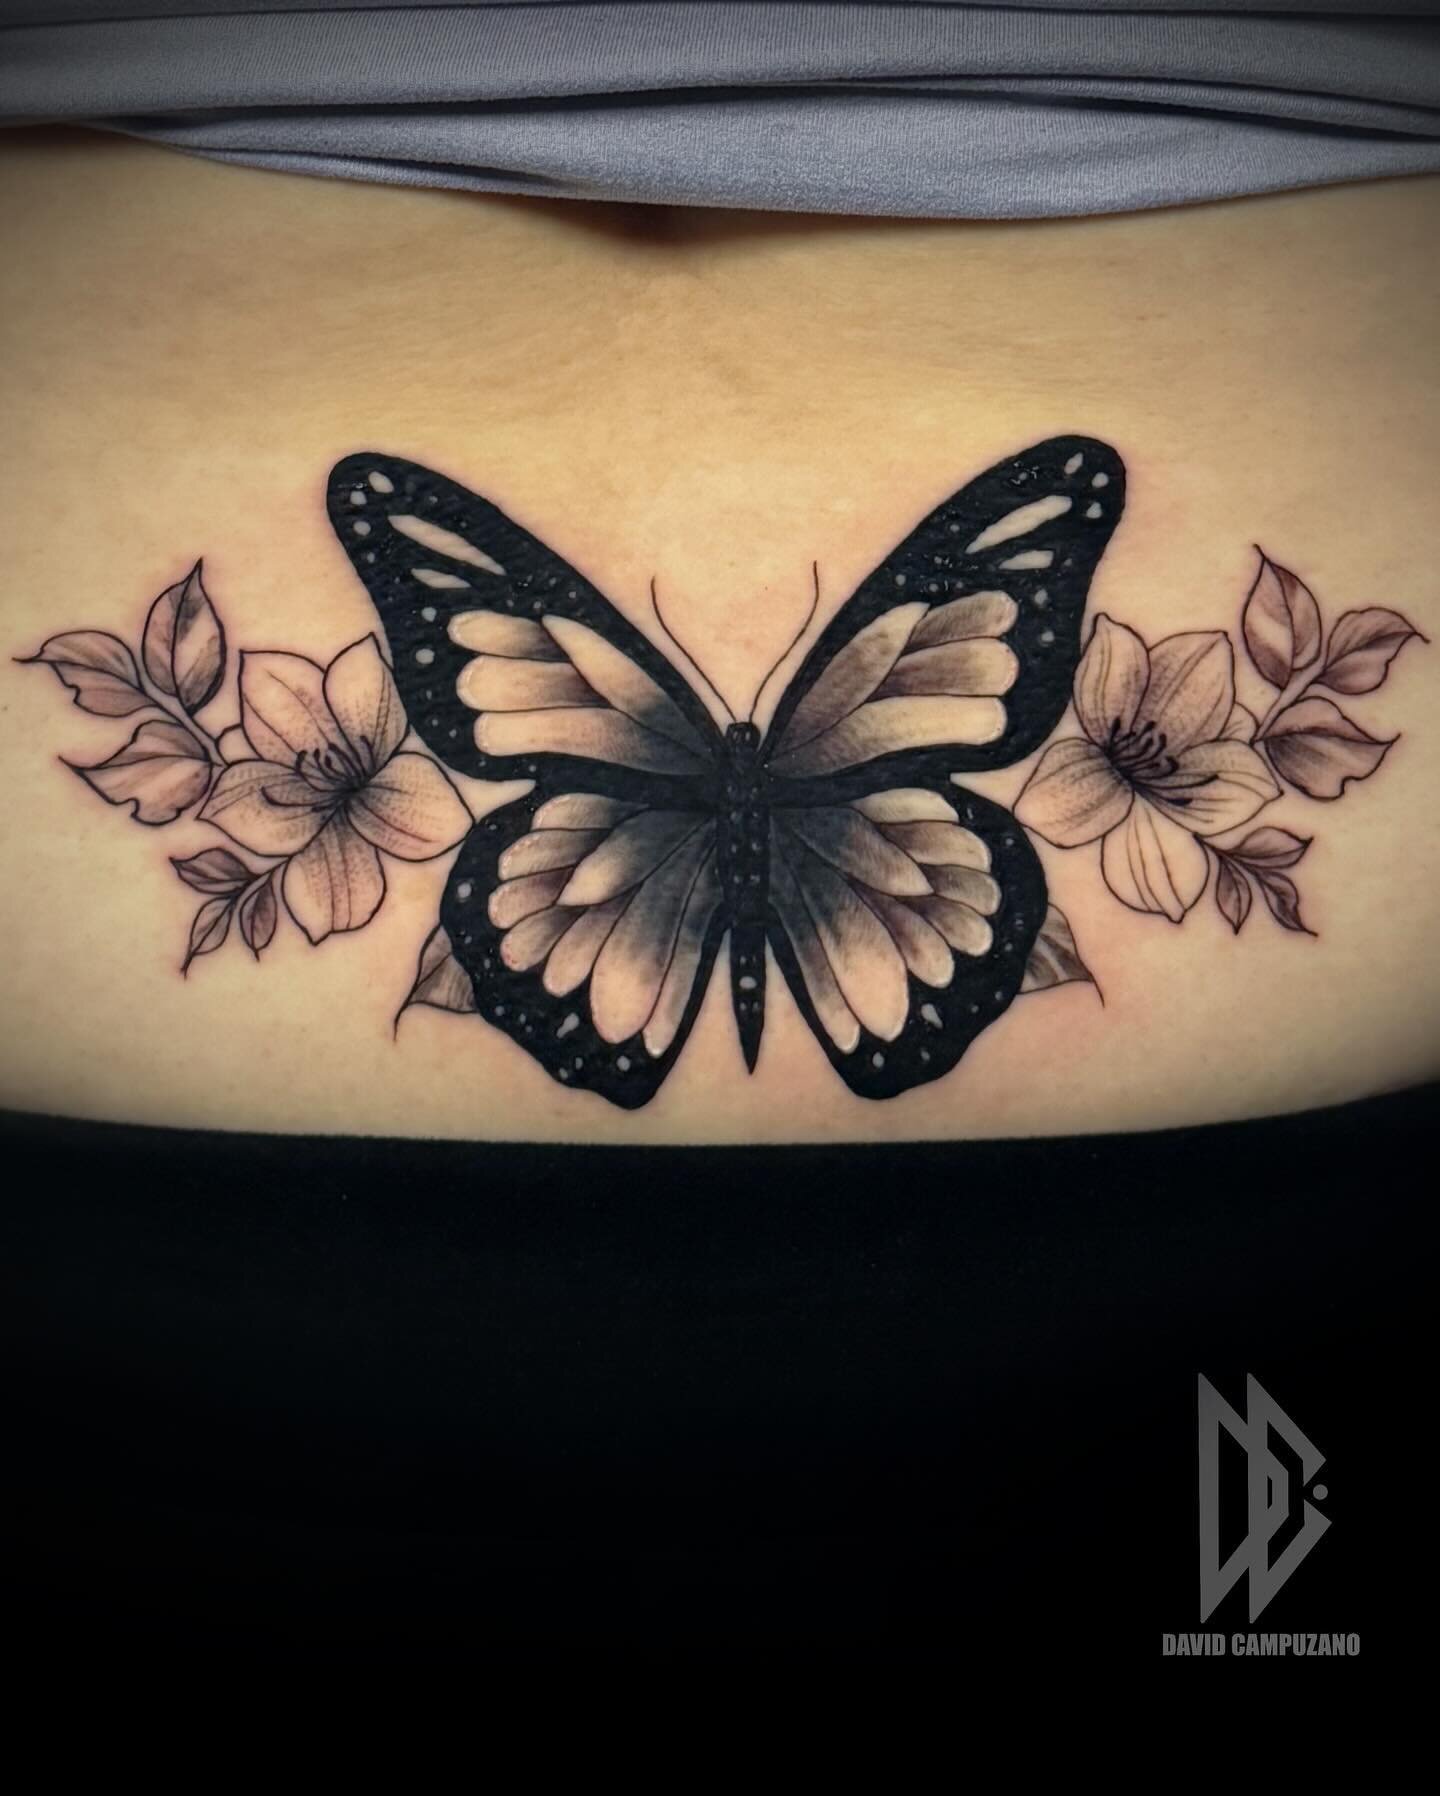 Tattoo done by @davidcampuzanotattoo send him a DM if you want to get a beautiful butterfly tattoo like this one.